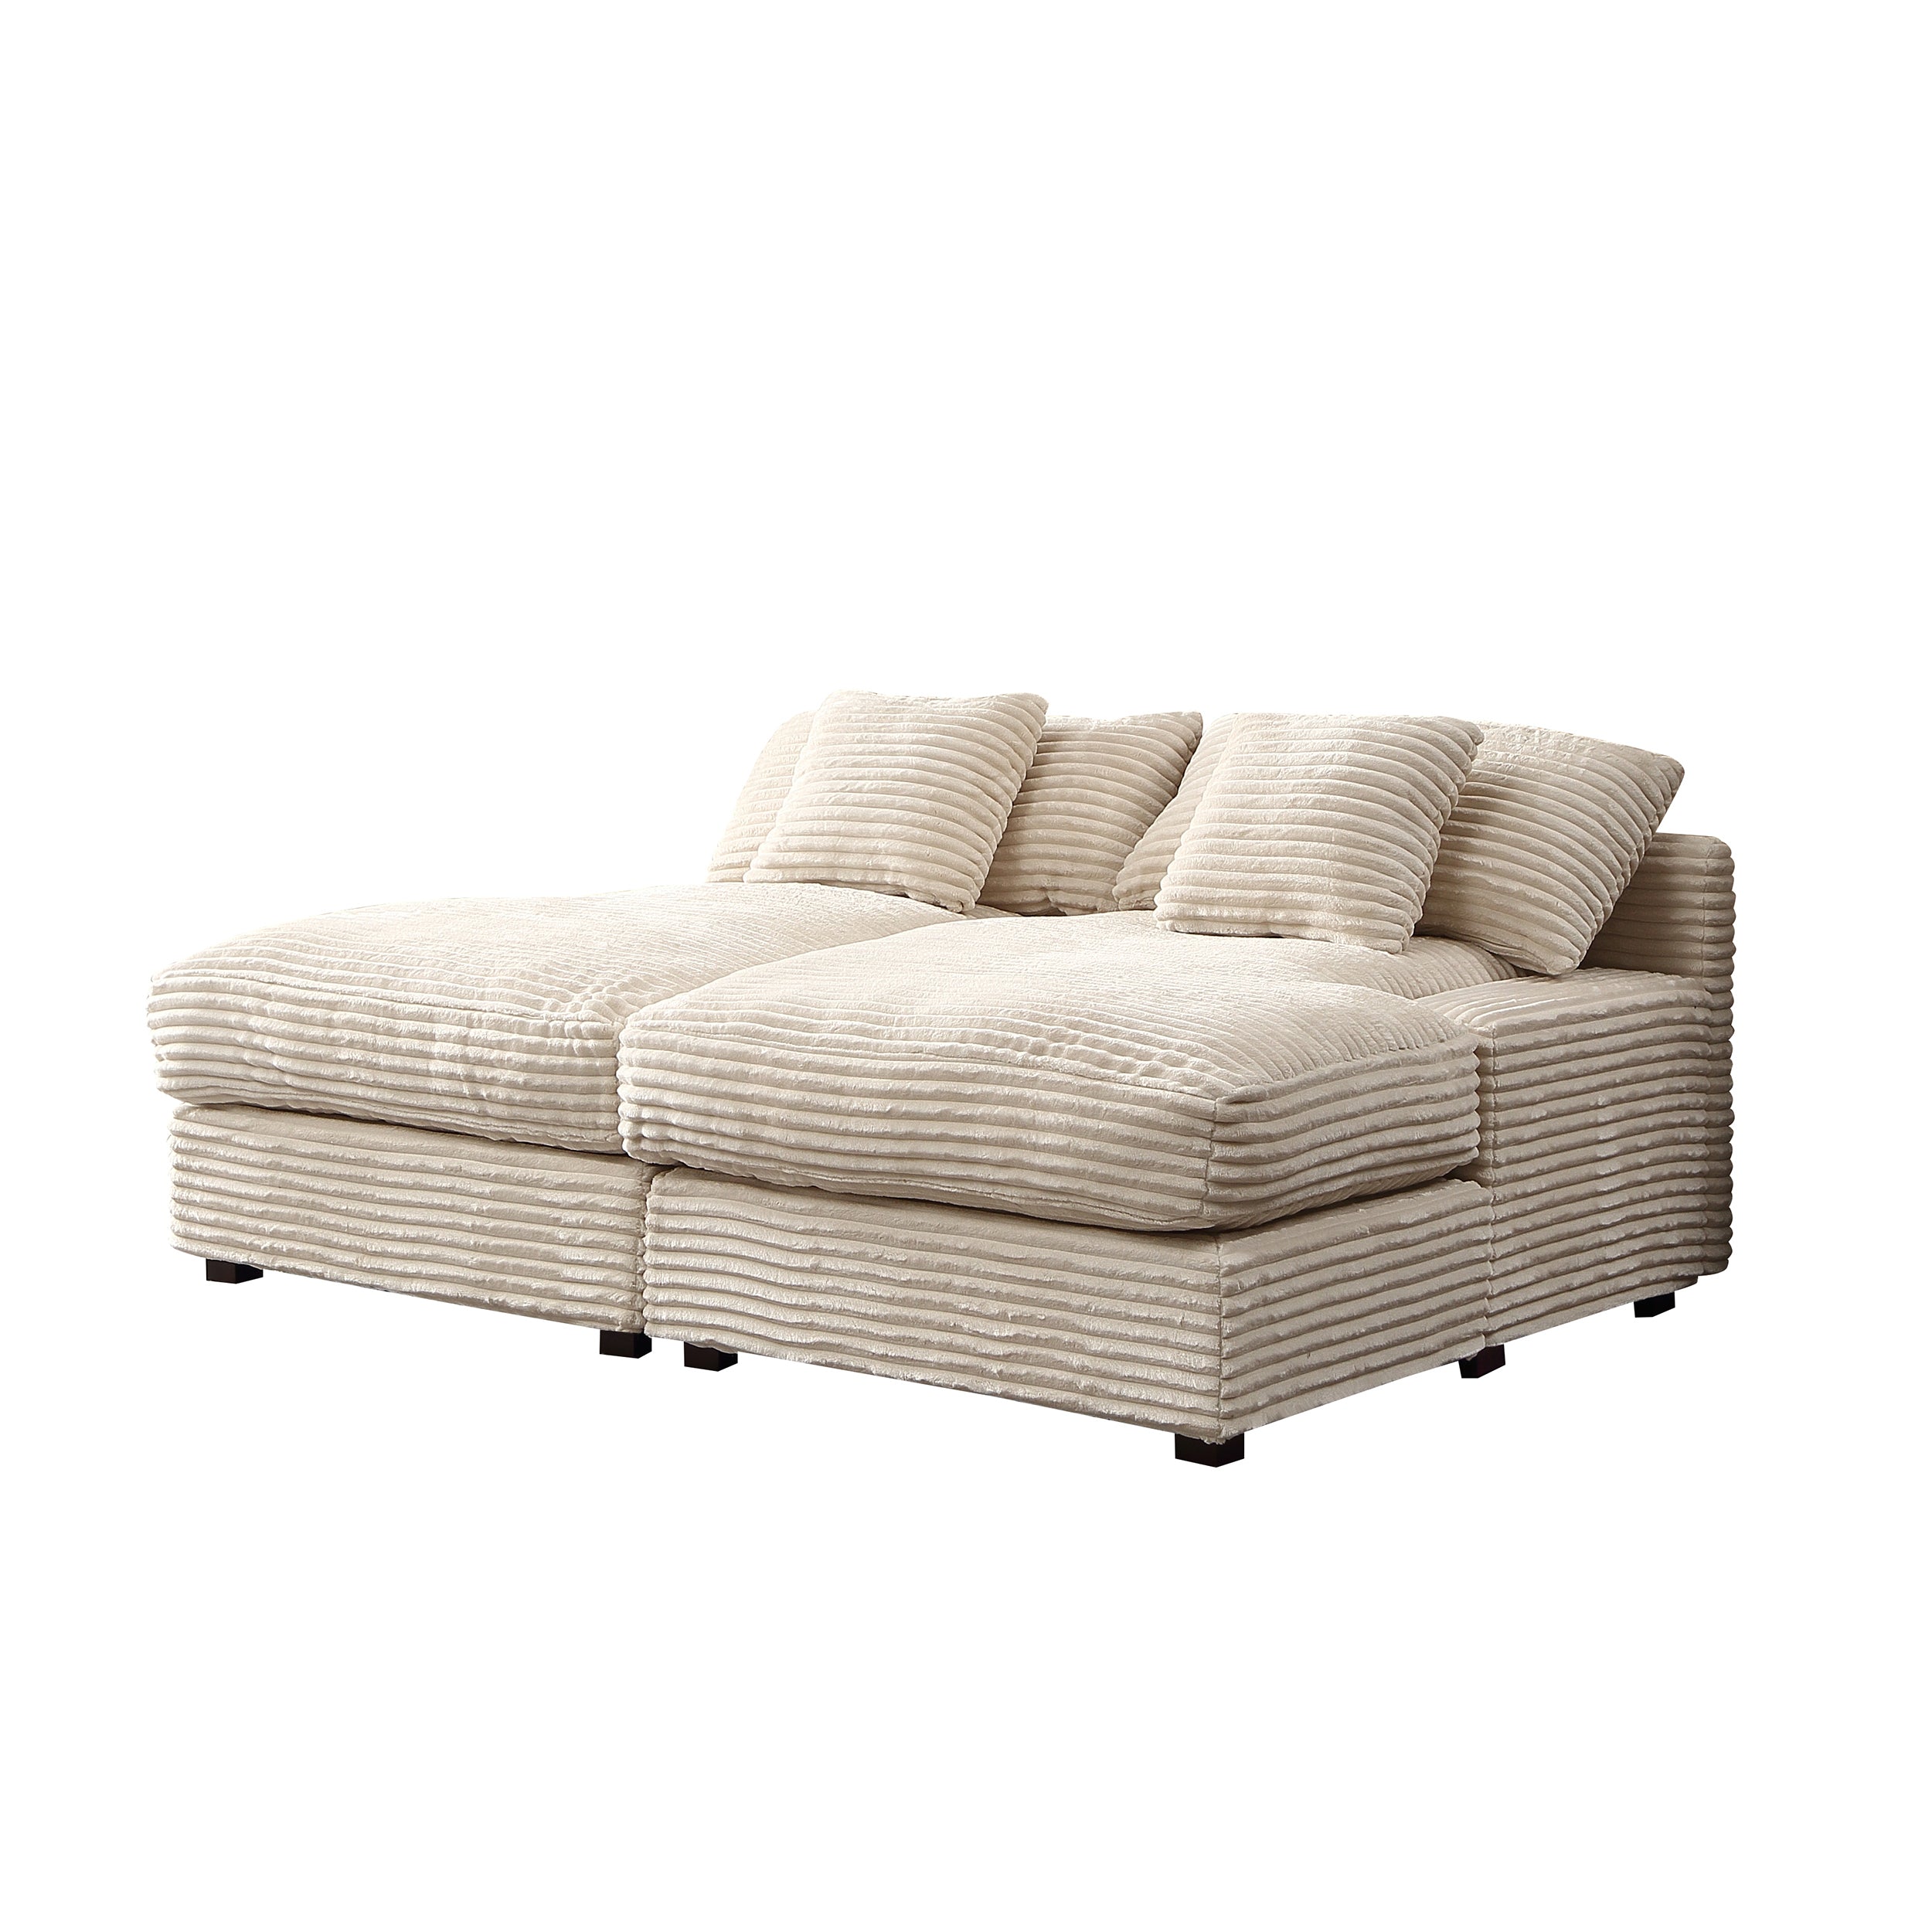 Louie Corduroy Sectional Sofa, Deep Seat Double Chaise Couch - Beige